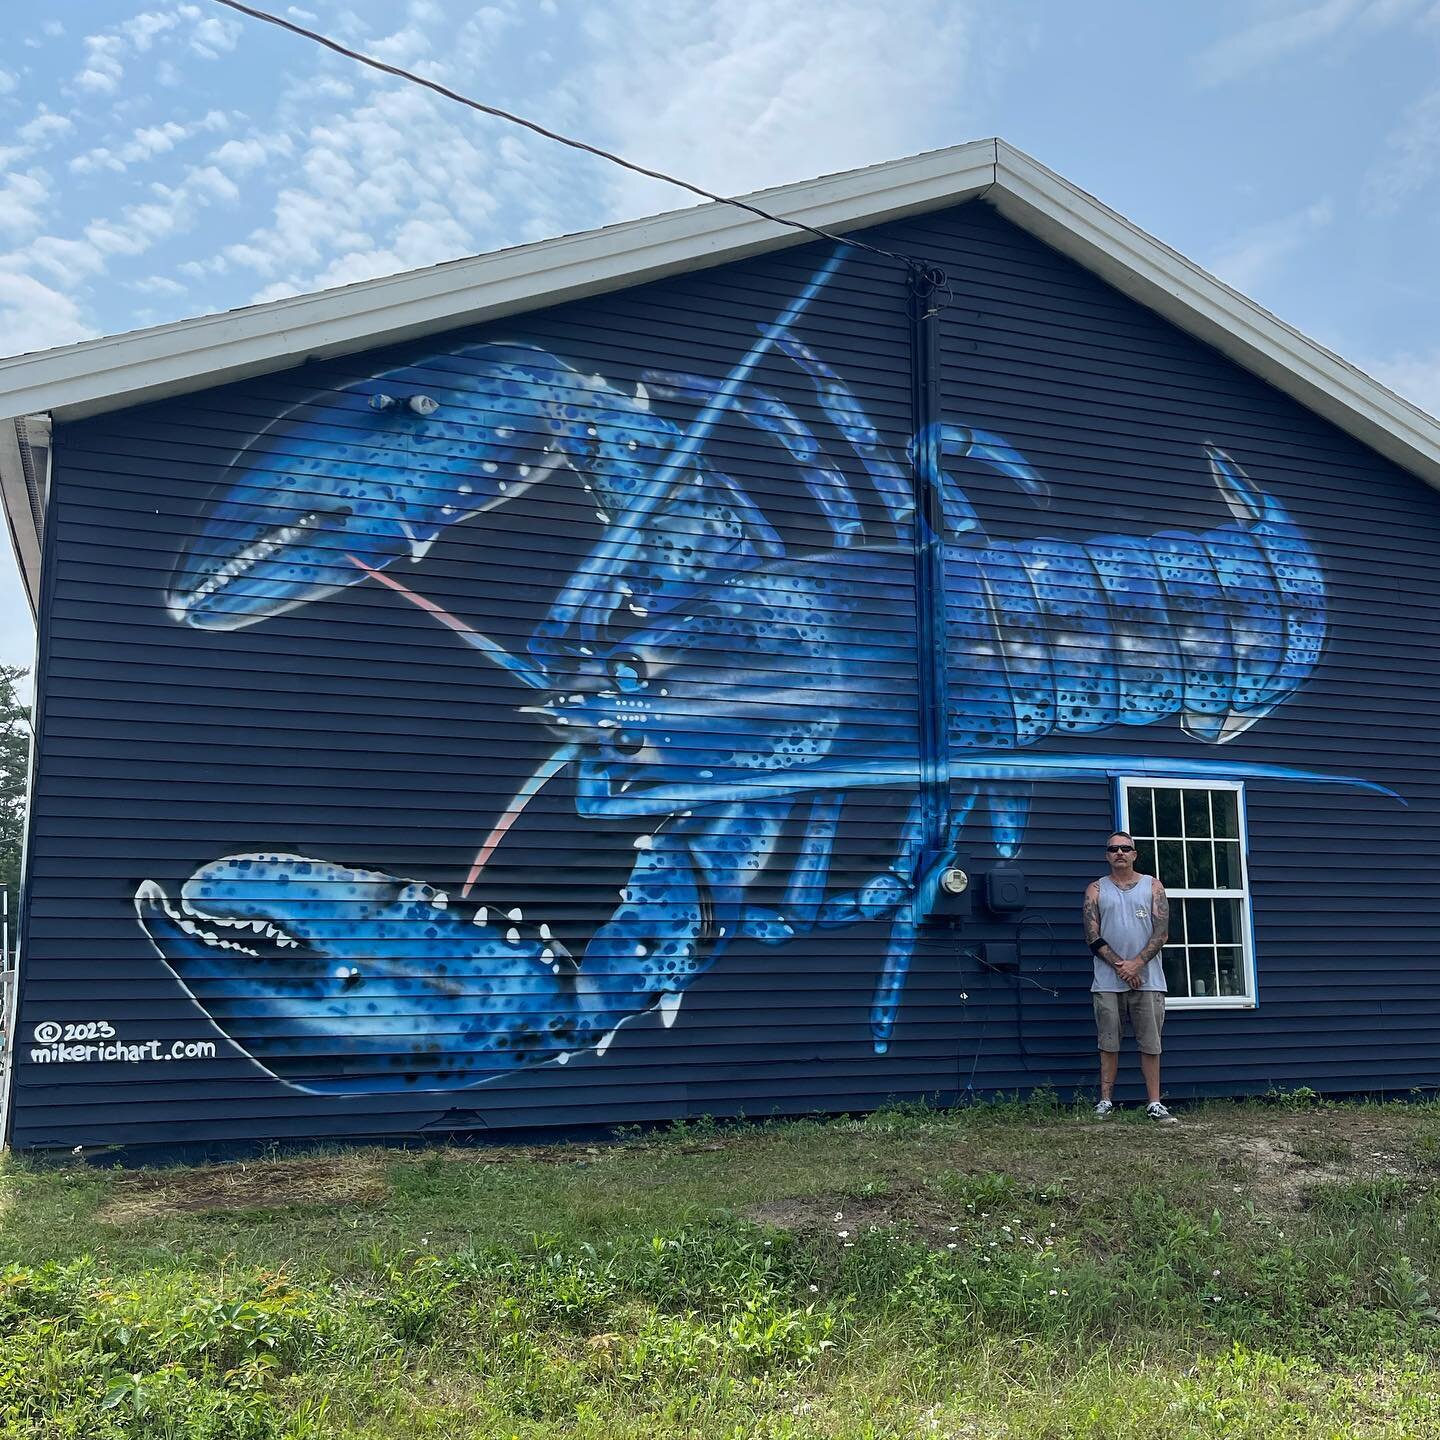 This wall has come so far. Blown away with @mikerichdesigns artwork, the detail and color is incredible.  Scroll right to see where this wall started, and his badass mural process #art #streetart #bluelobster #mural #graffiti